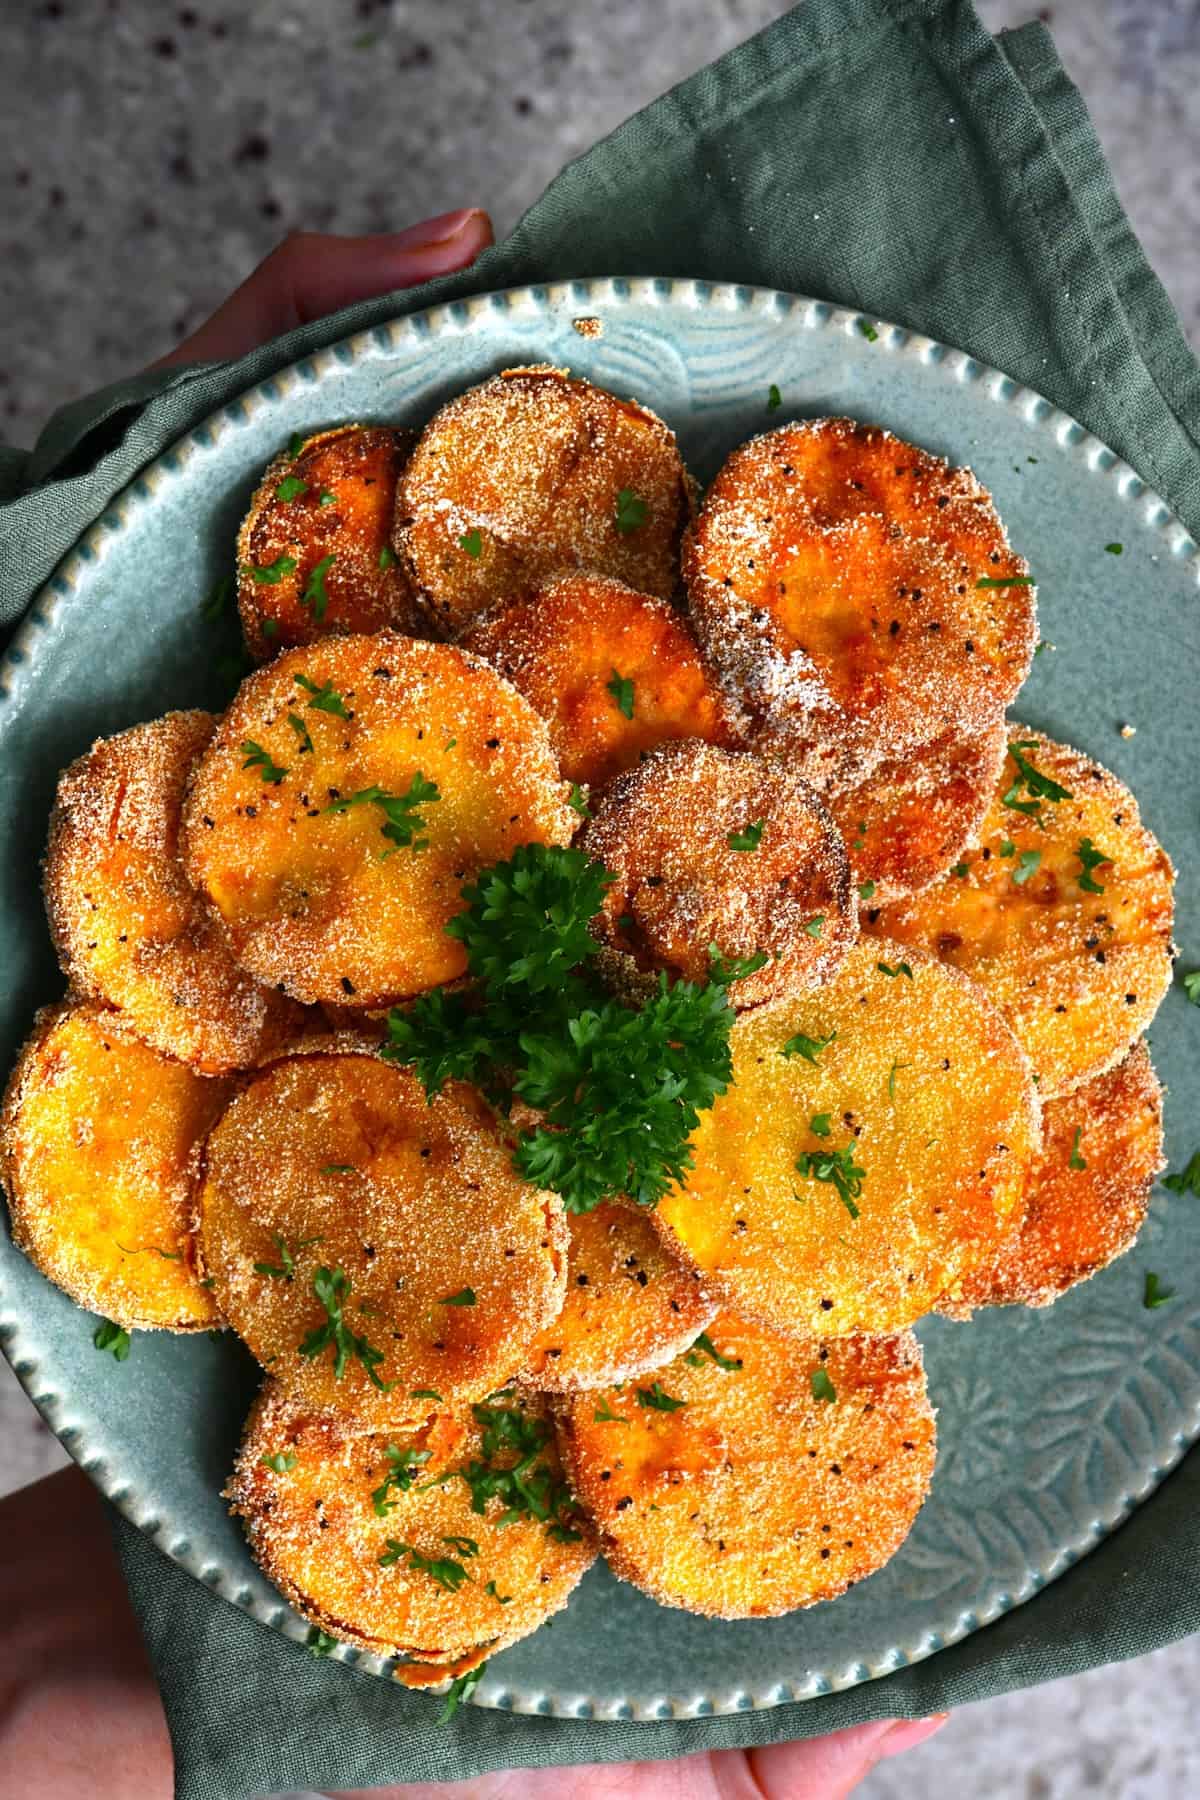 Freshly fried slices of yelloe squash on a plate topped with parsley